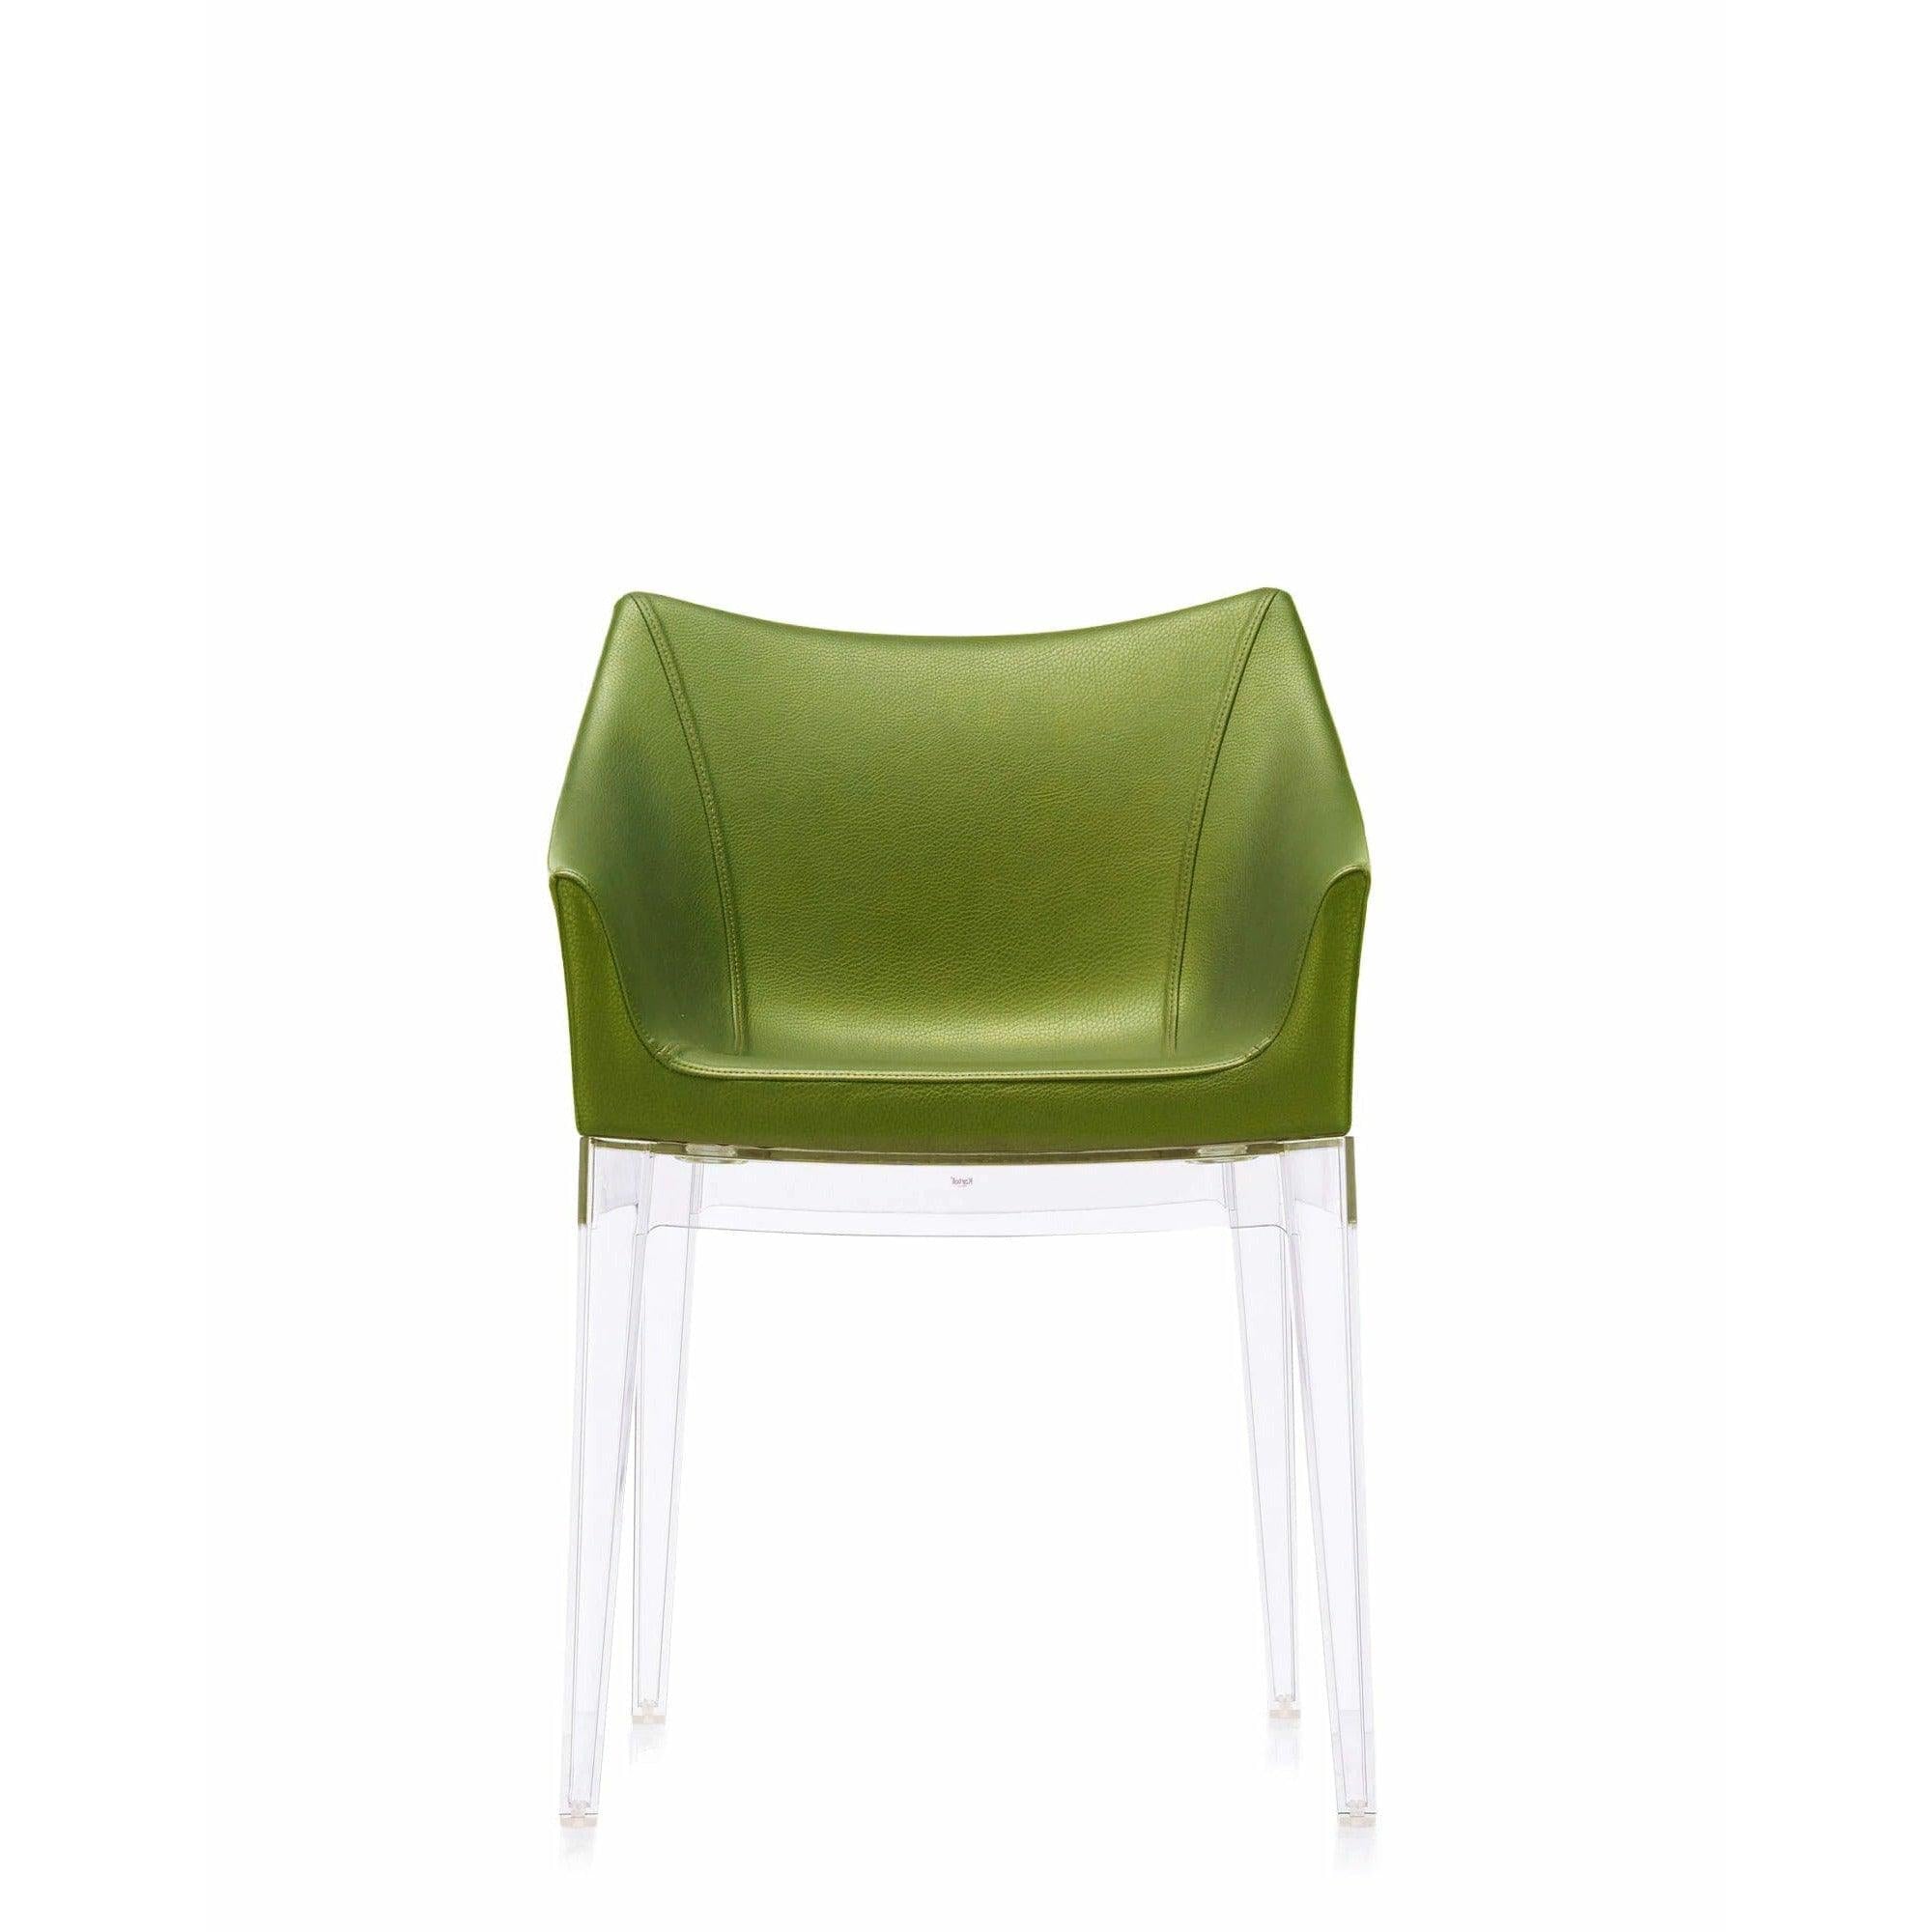 Madame Armchair - Curated Furniture $1000-$2000, armchair, beige, Black, brown, chair, chairs, desk chair, dining chair, gray, Green, kartell, lounge chair, Memorial Weekend Sale, Philippe Starck, purple